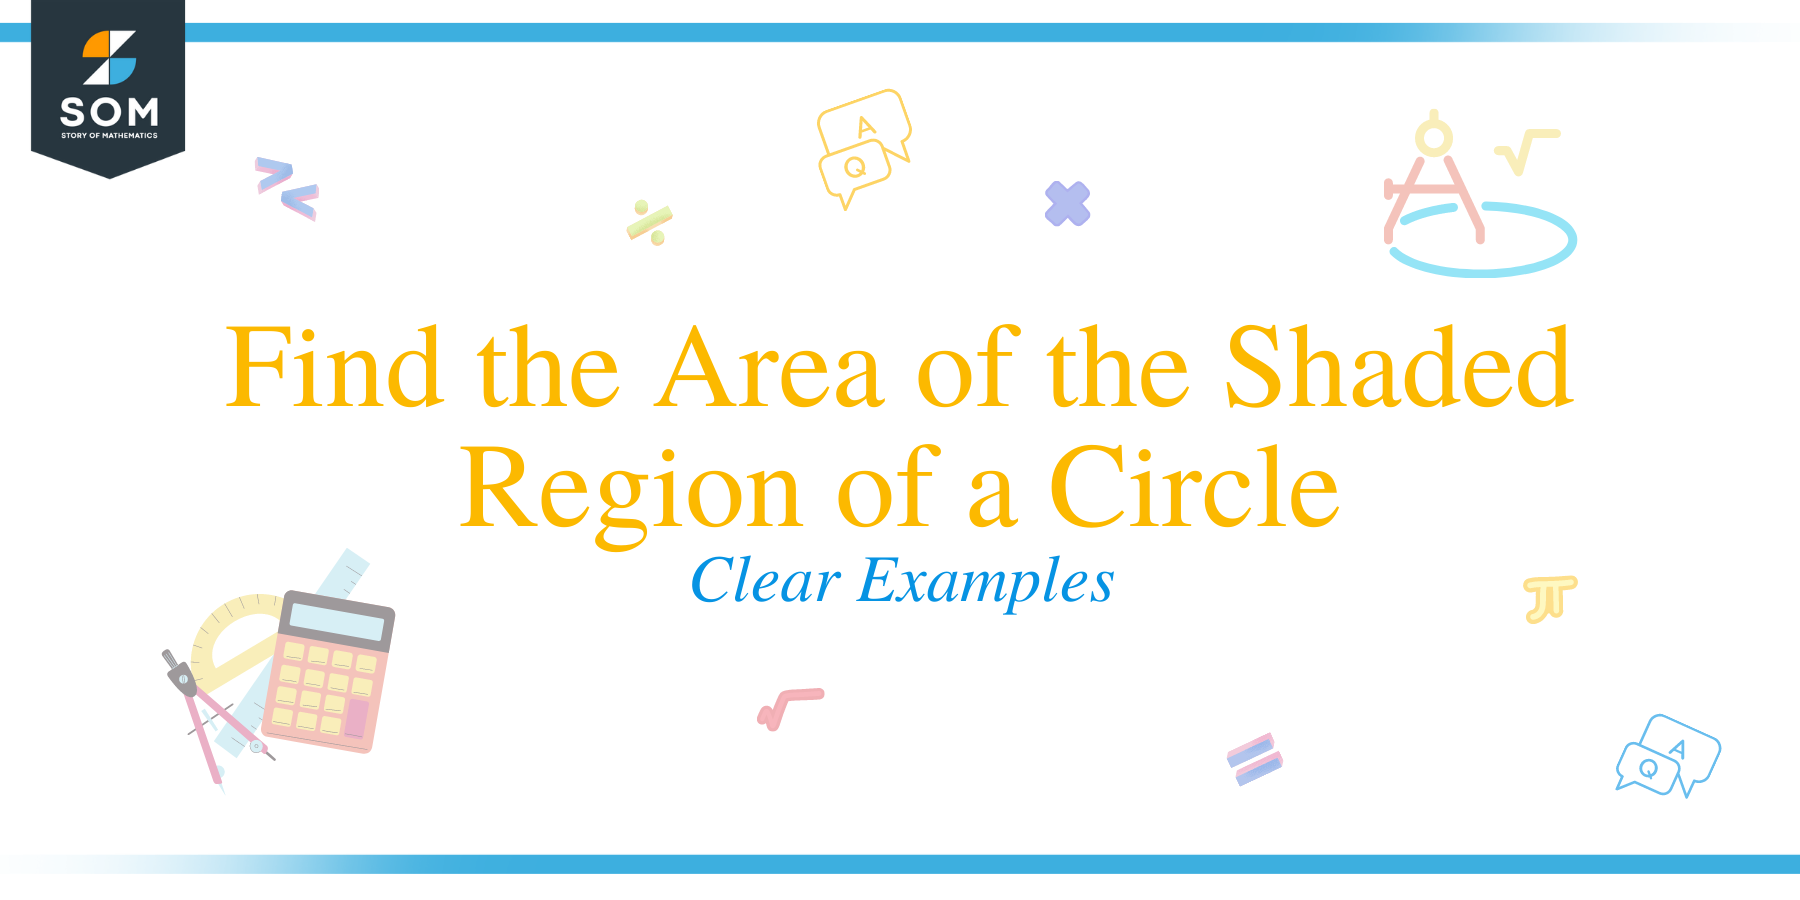 Find the Area of the Shaded Region of a Circle